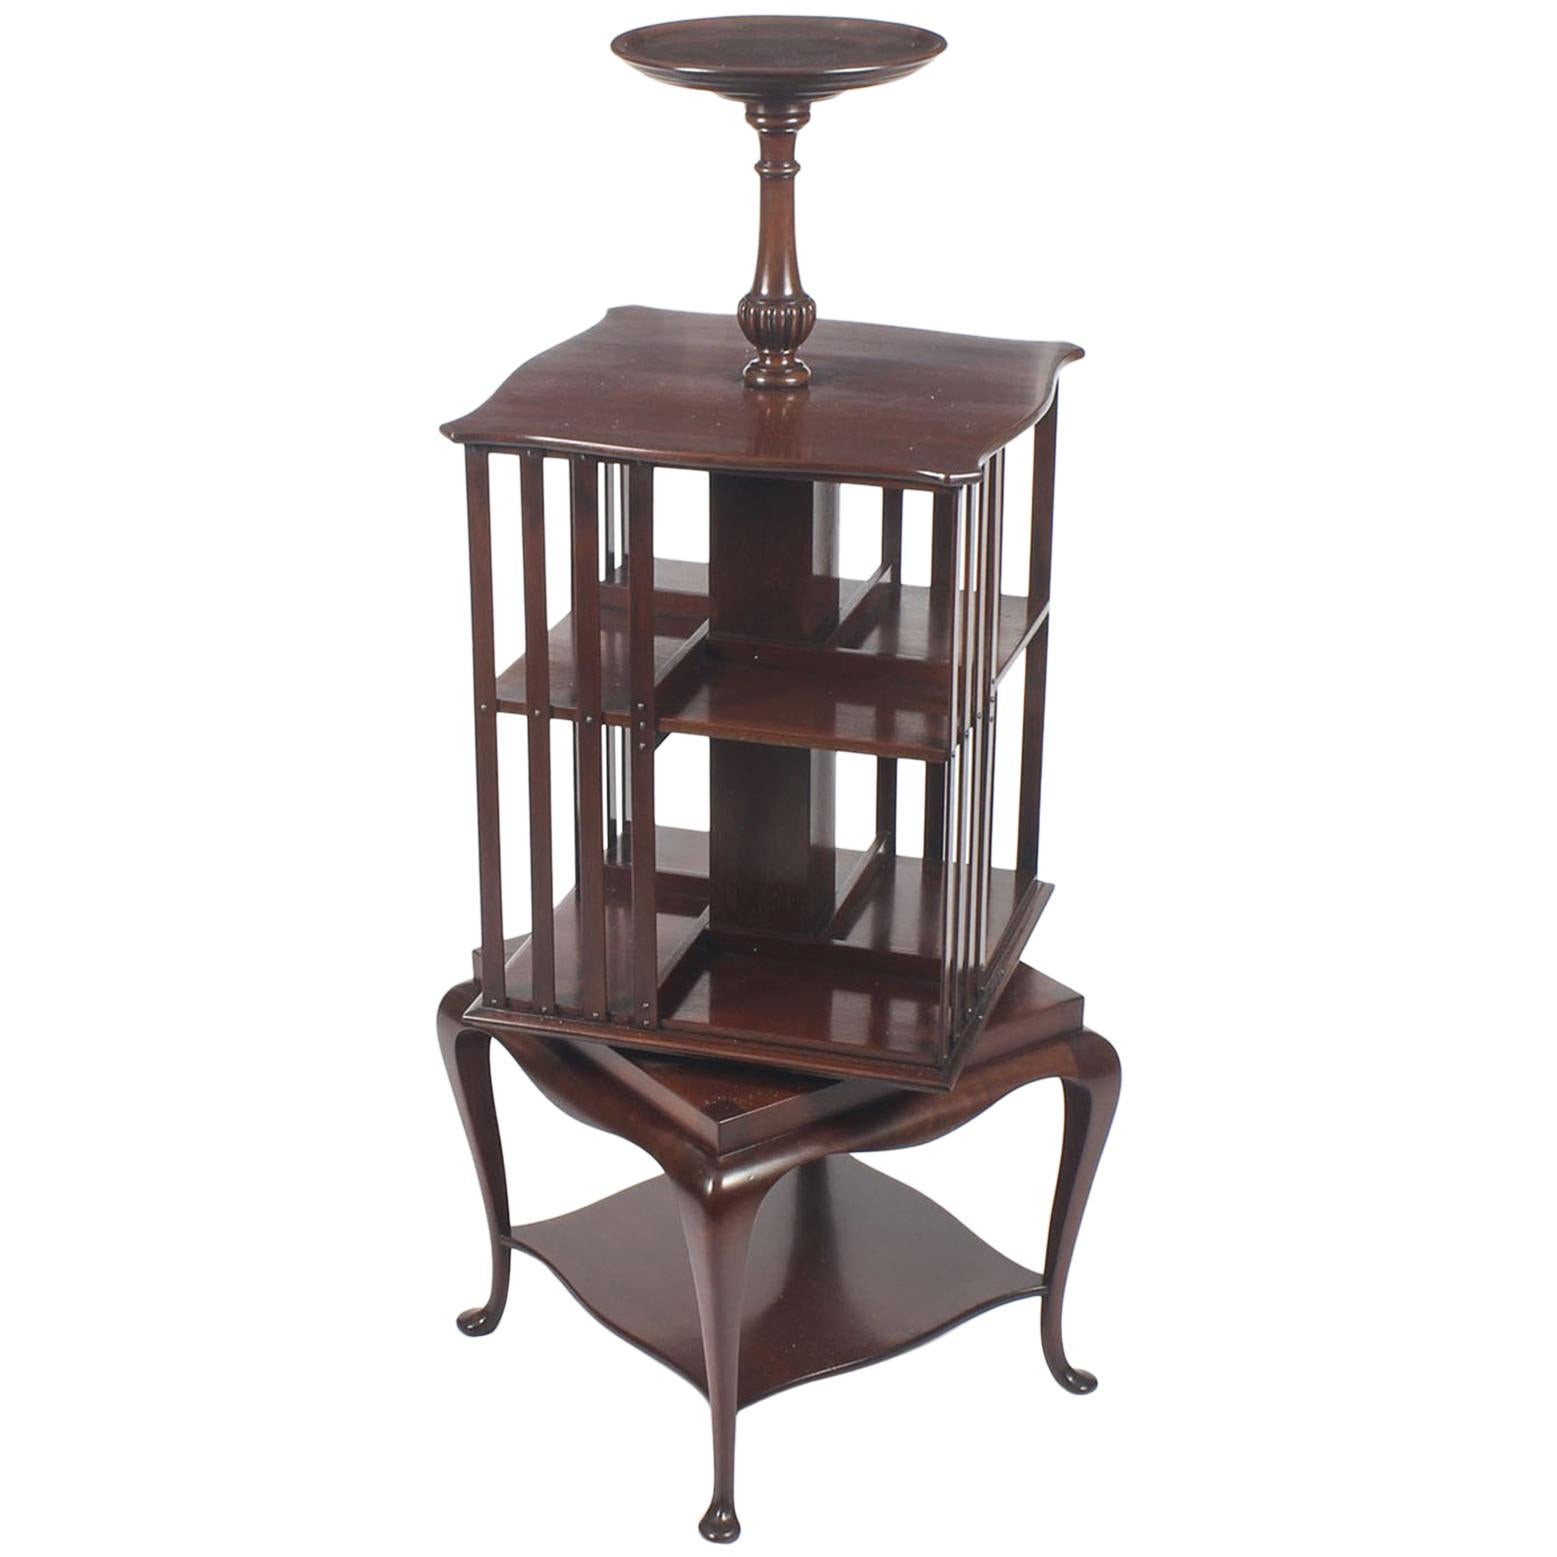 Early 20th Century Mahogany Revolving Bookcase Book Stand with Pedestal